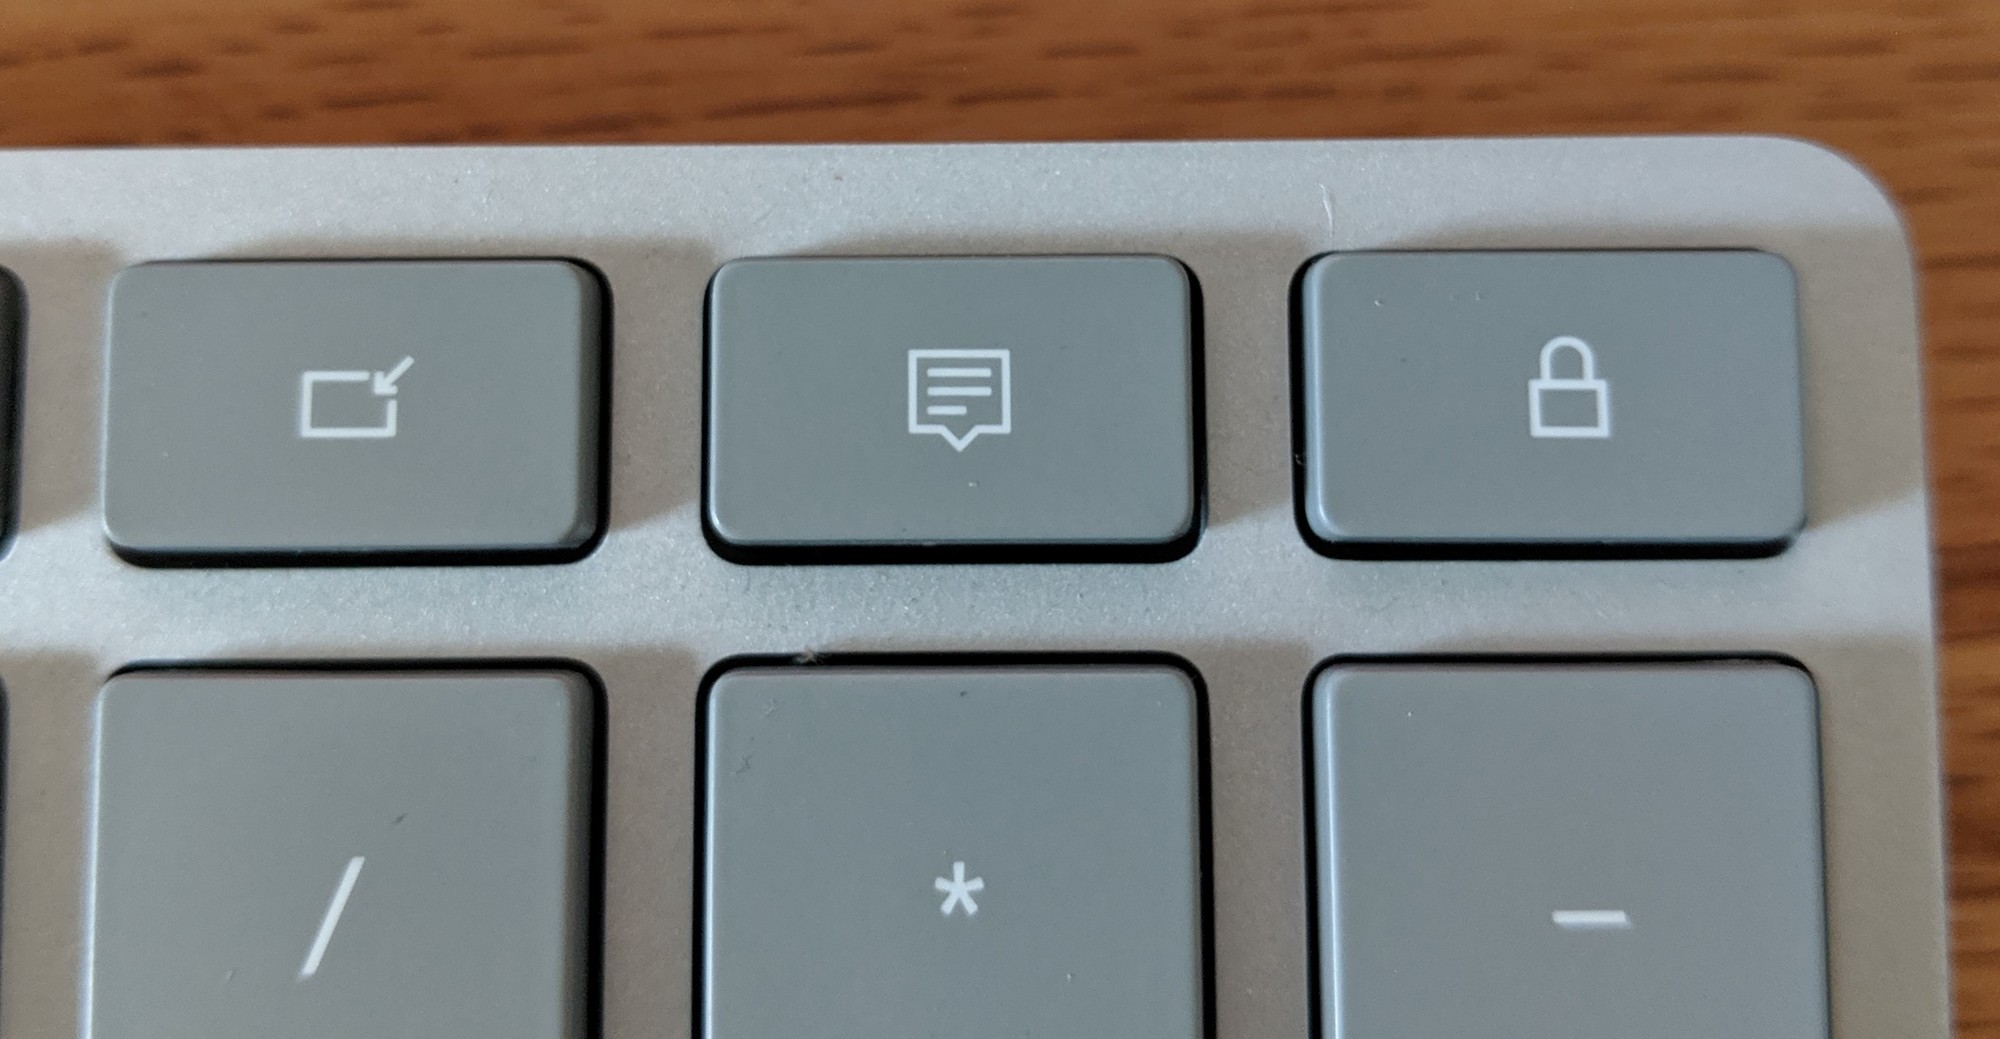 Microsoft Modern Keyboard: what's this icon supposed to mean? 6401b110-193a-4d07-84fe-8e0b96e797ca?upload=true.jpg